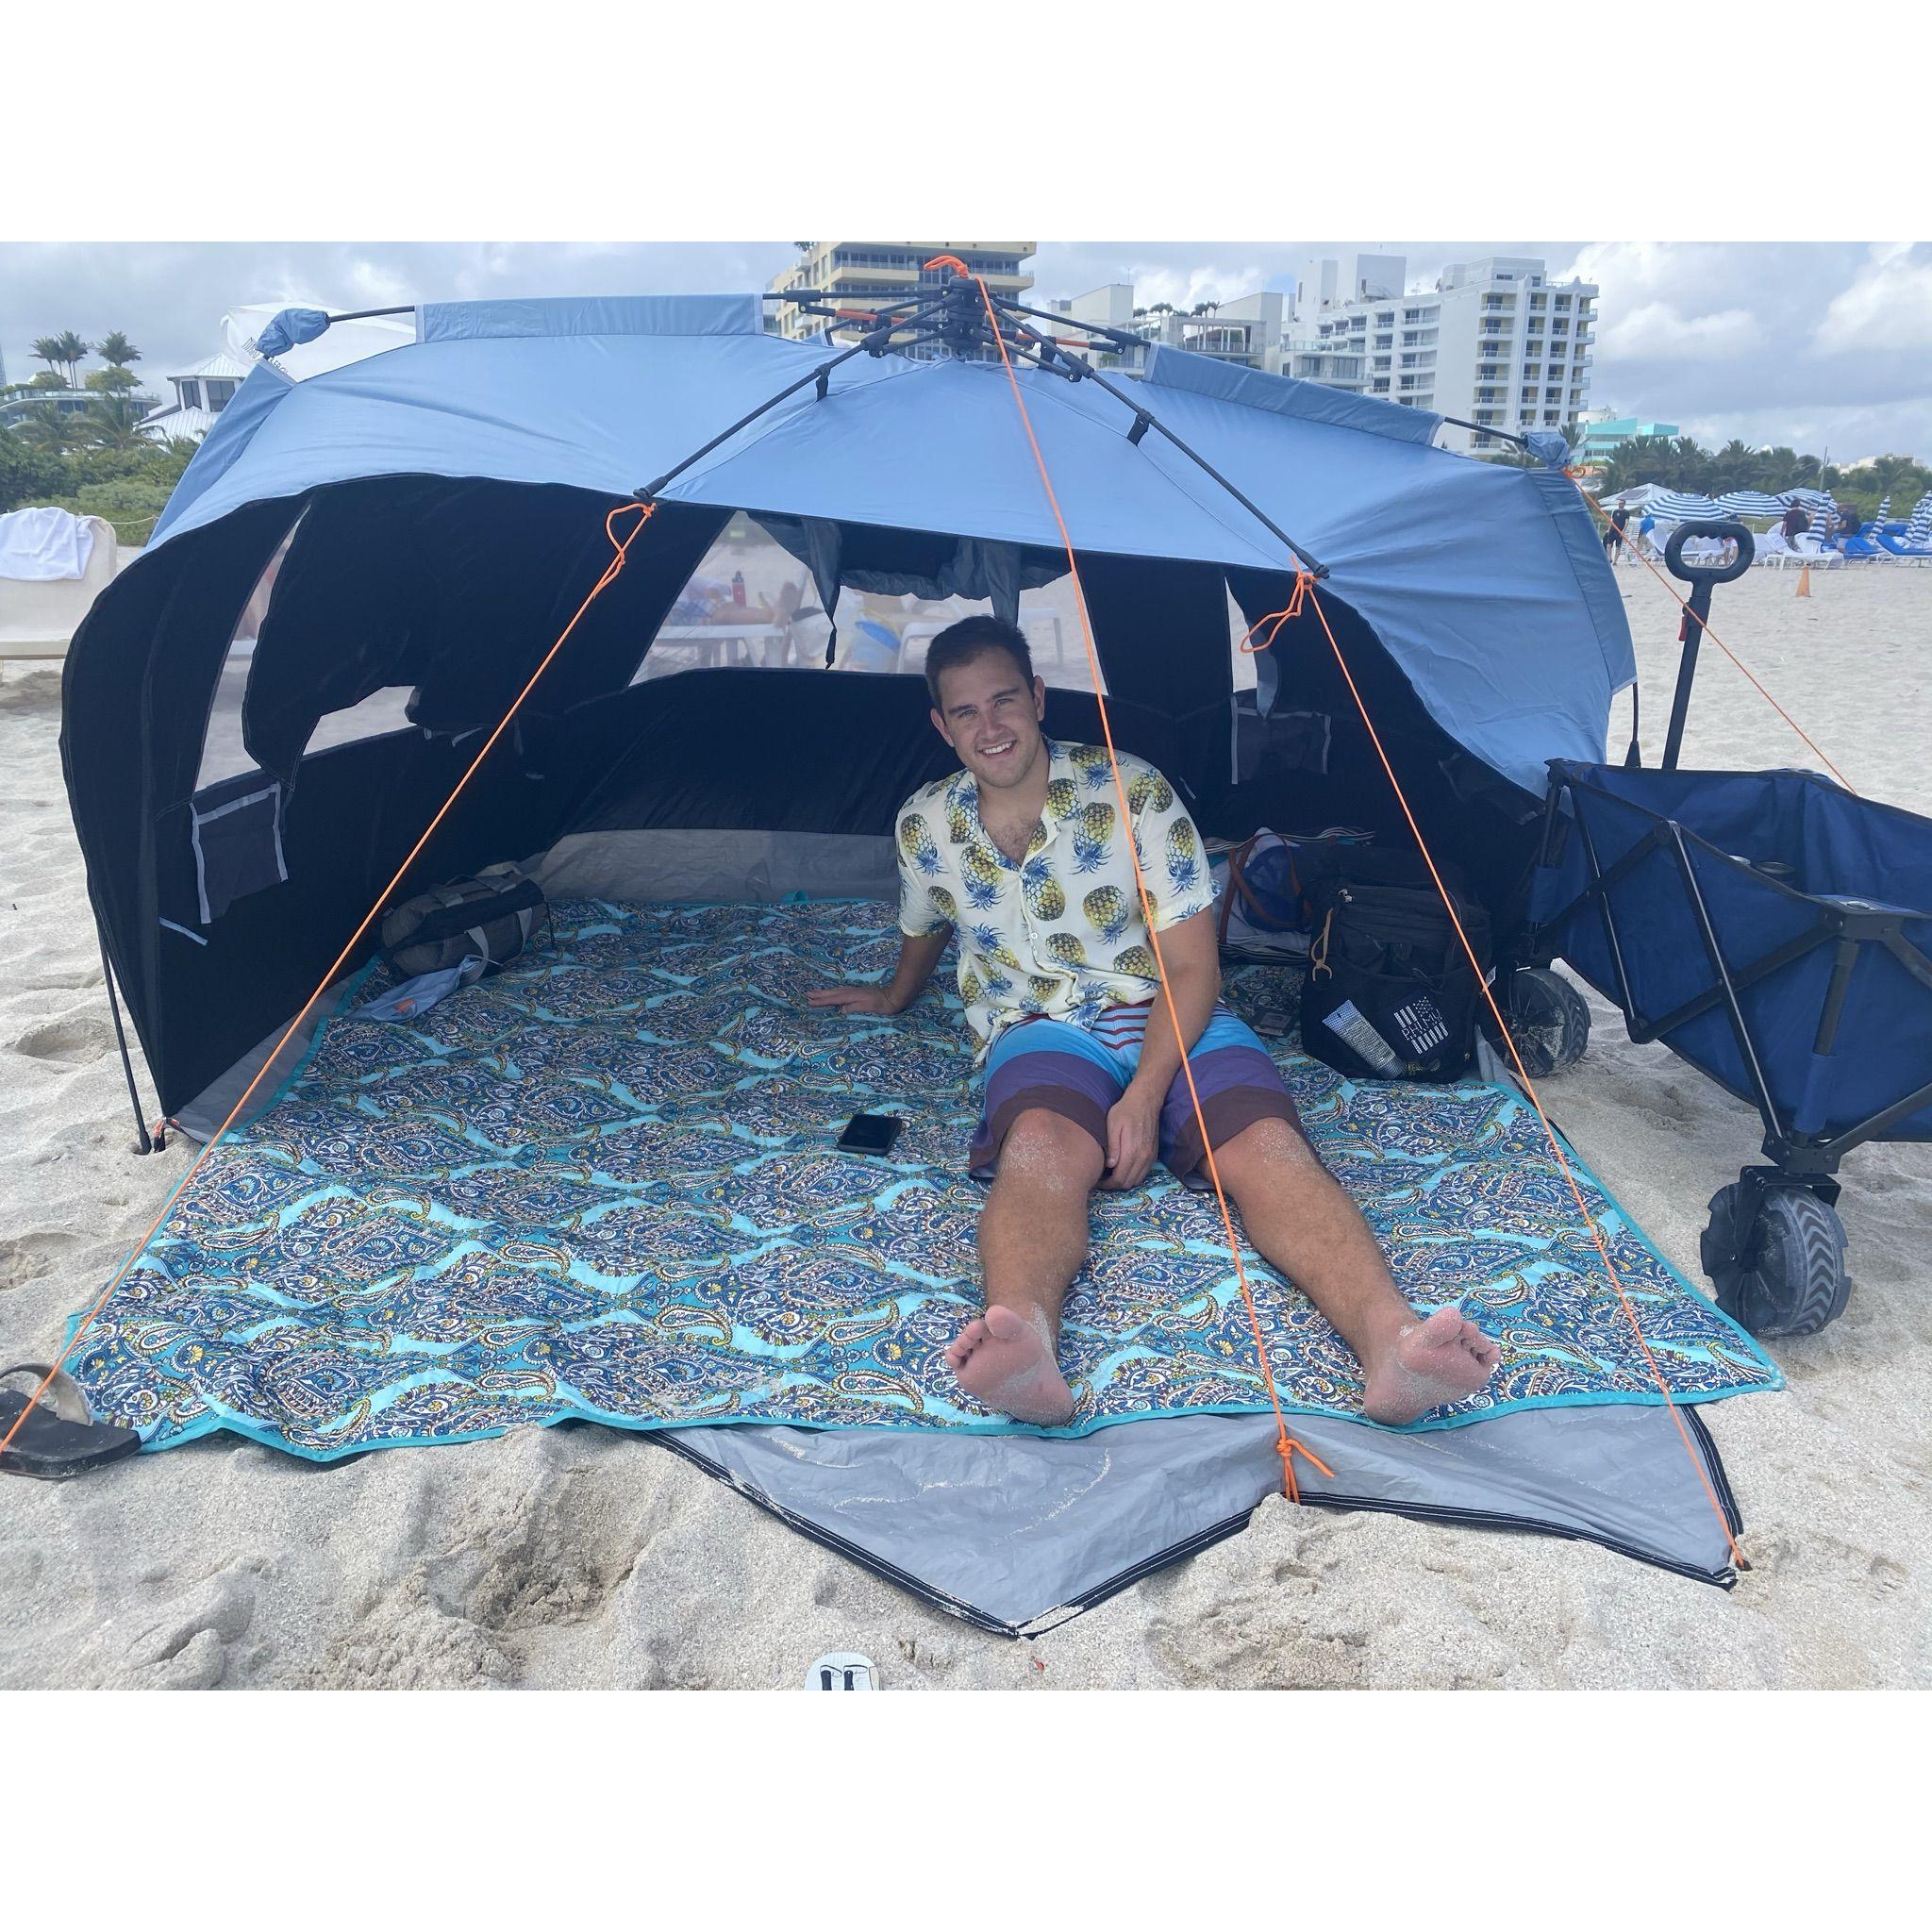 On most weekends, Fred and Jordan try their hardest to make it to the closest beach. They set up their beach tent and enjoy a beer while listening to country songs on the JBL speaker and watching the tide roll in.